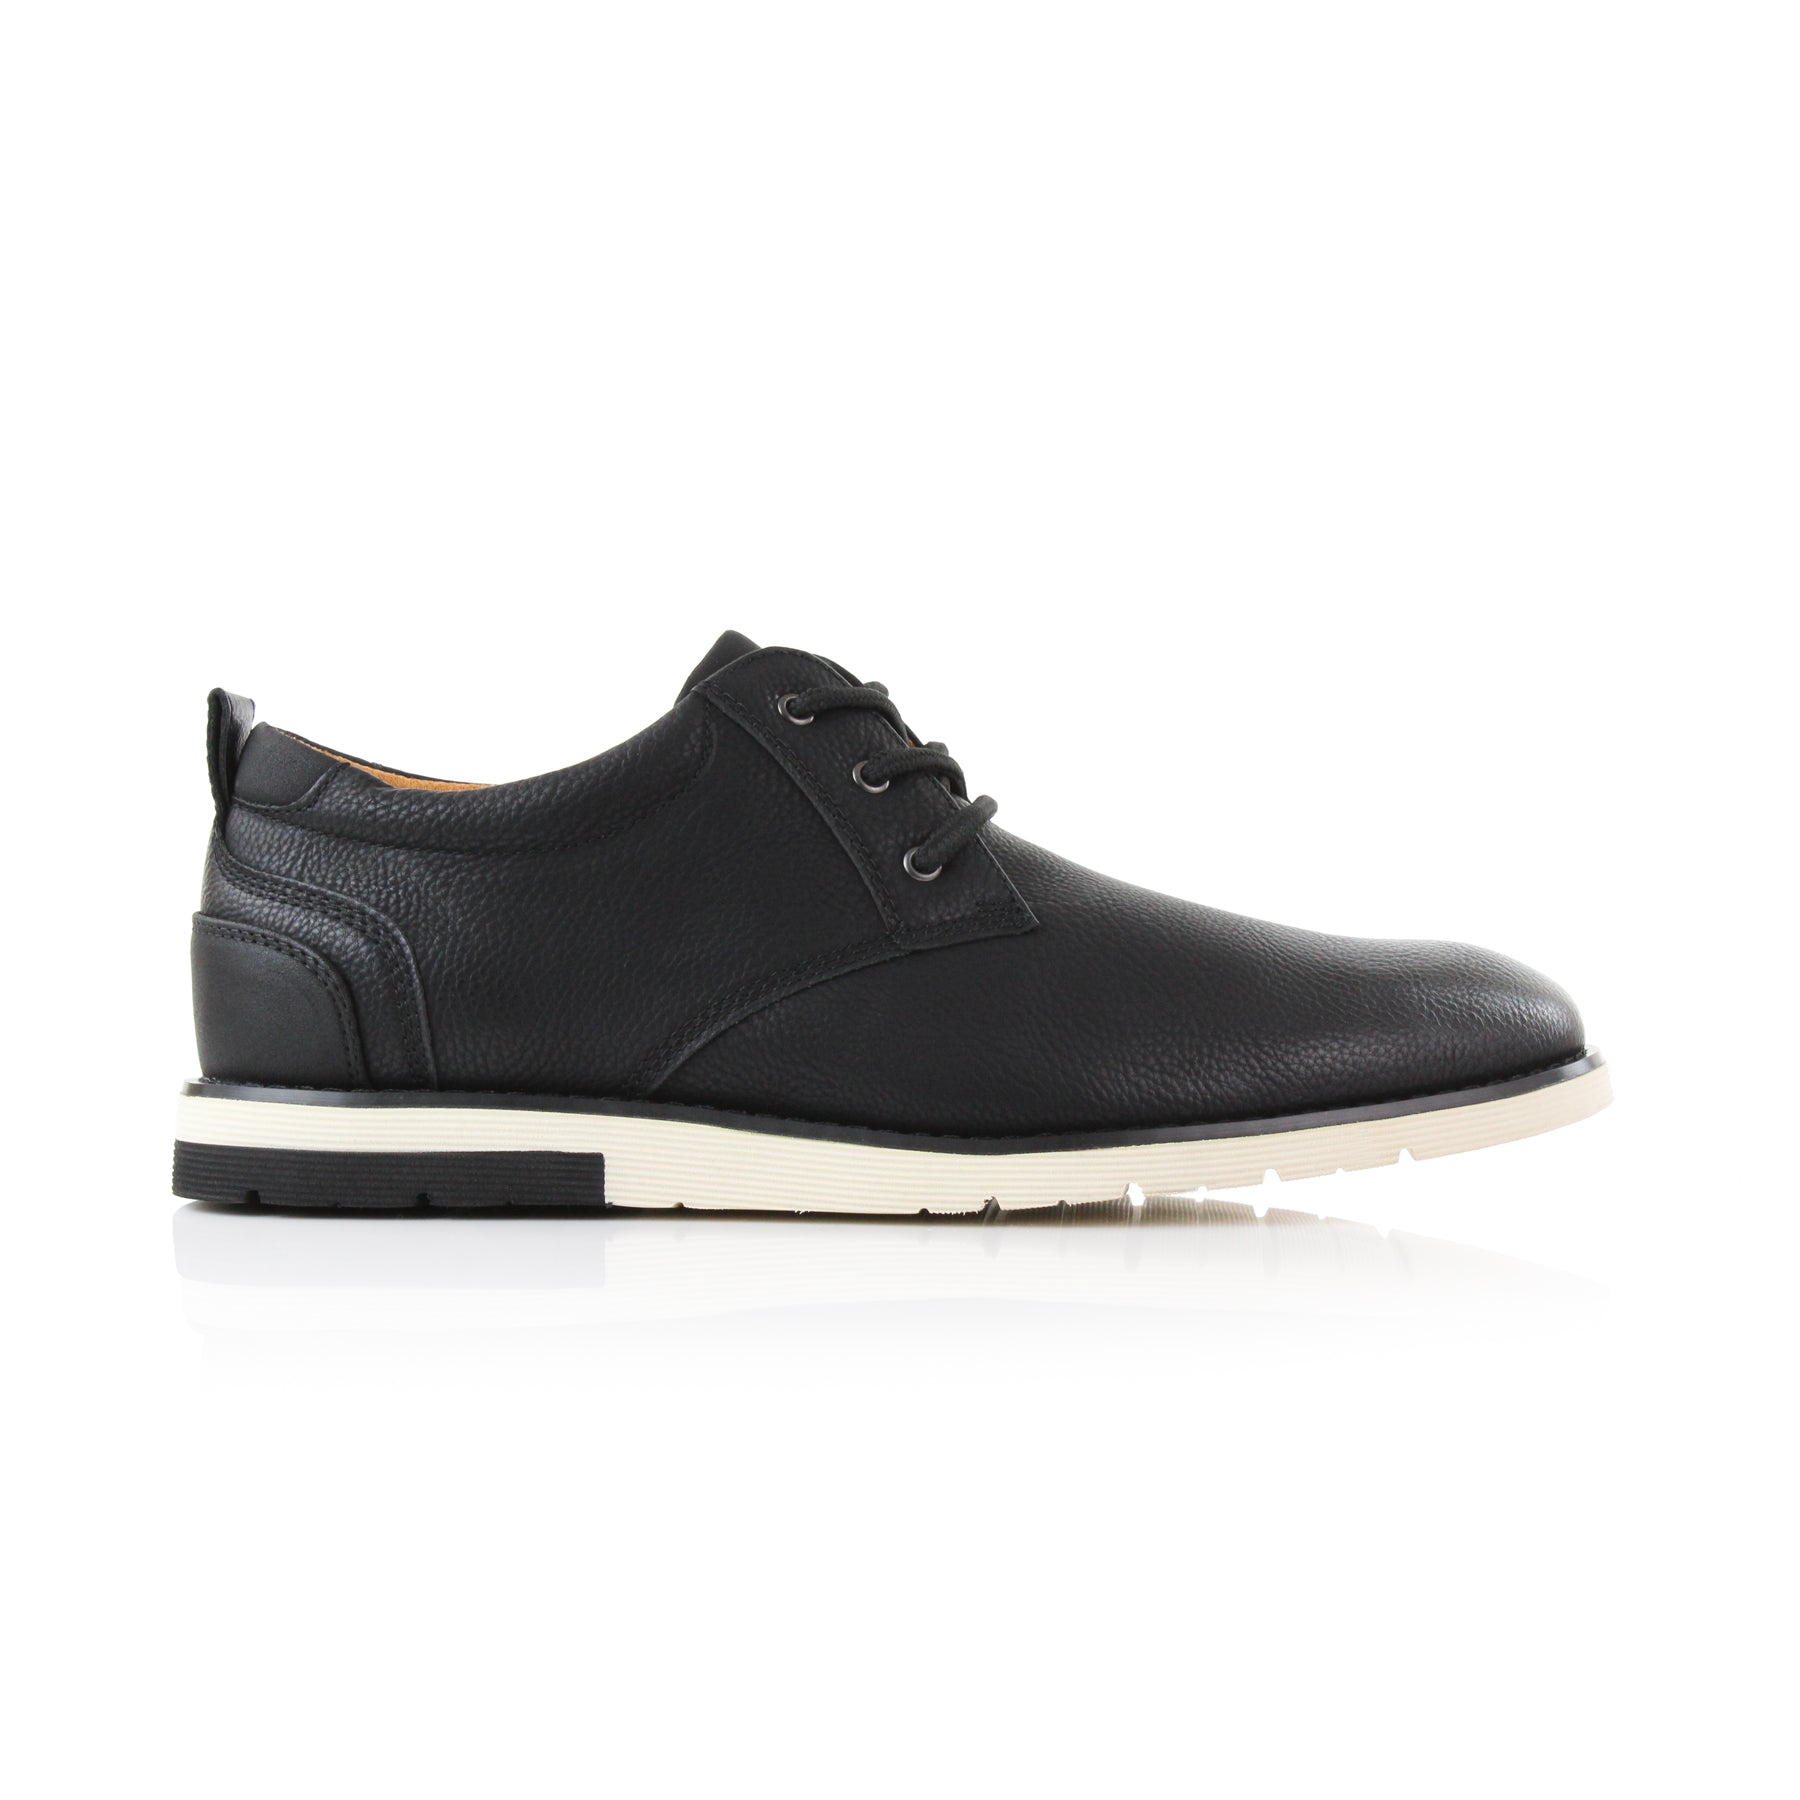 Grained Leather Sneakers | Ayden by Ferro Aldo | Conal Footwear | Outer Side Angle View